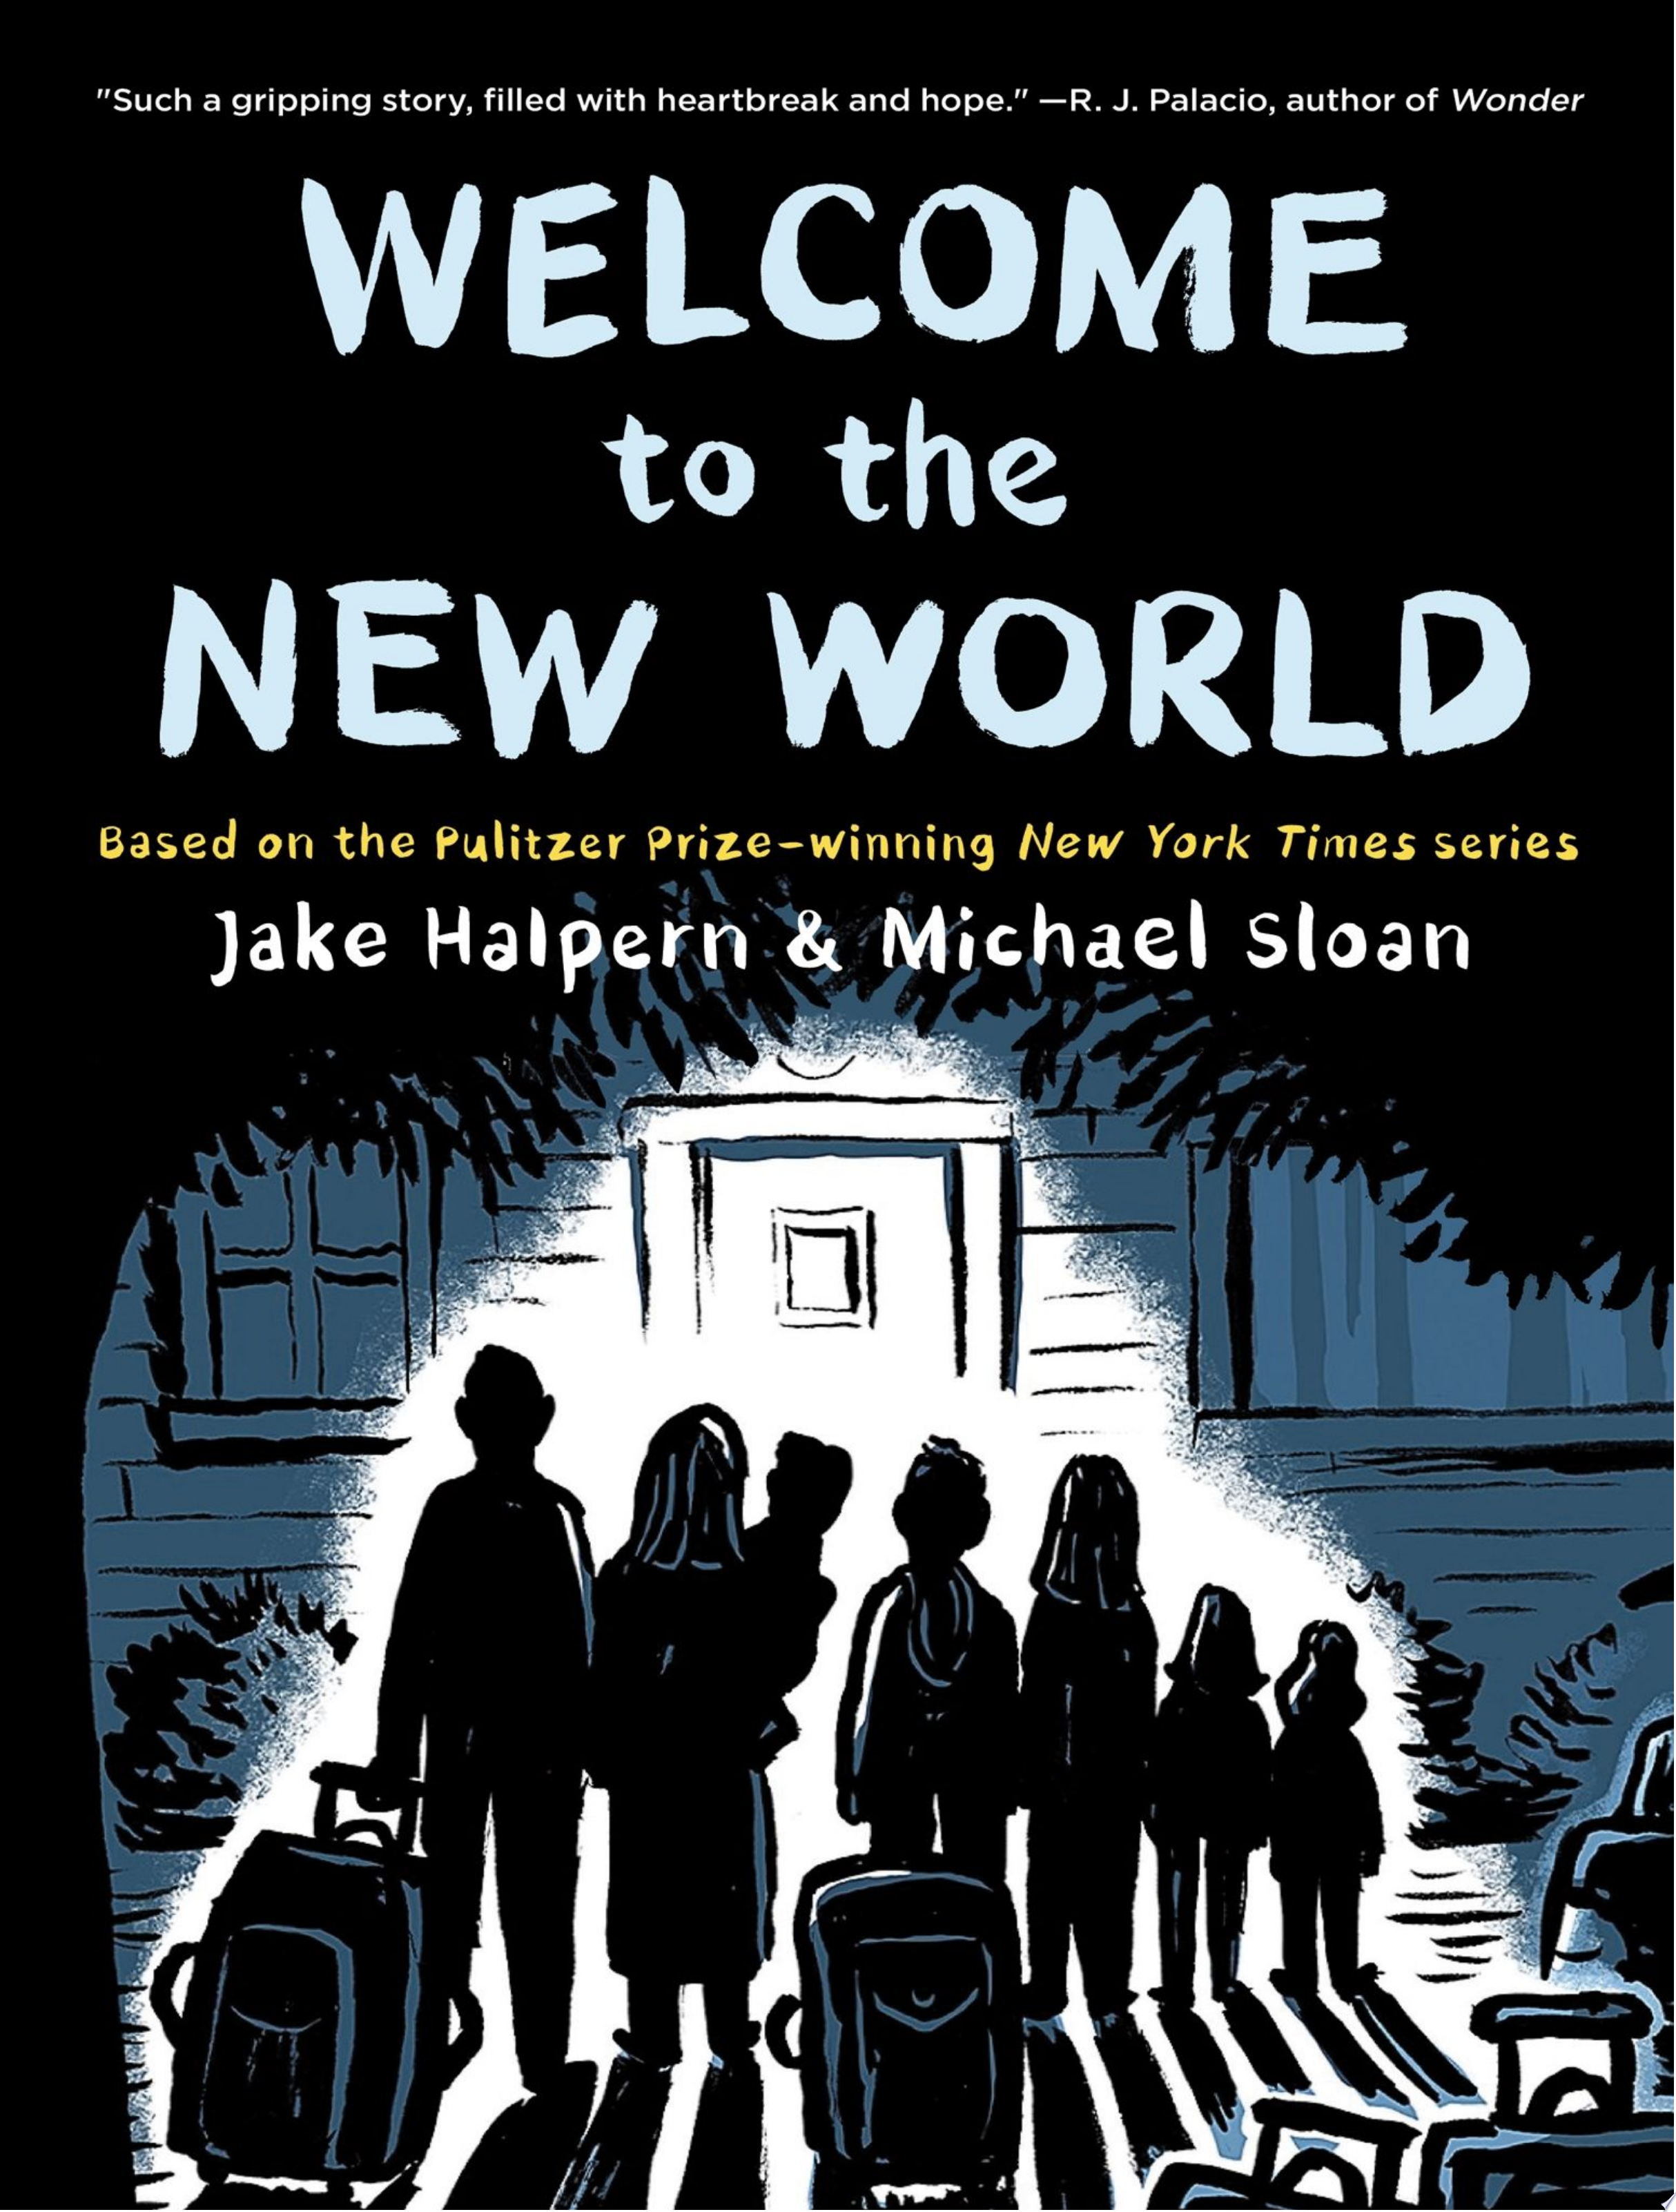 Image for "Welcome to the New World"